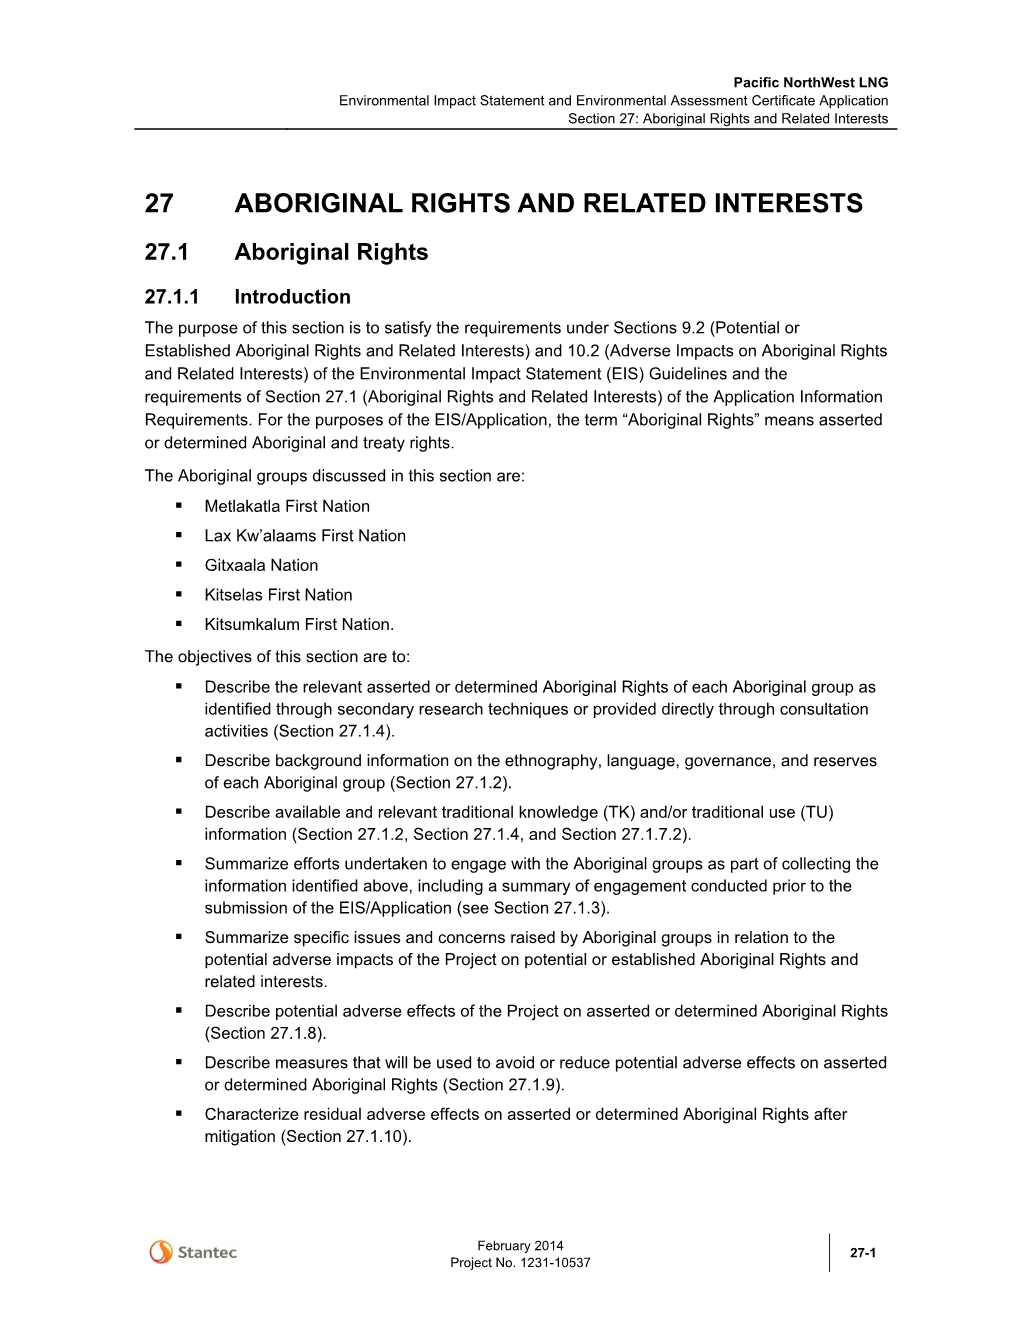 27 Aboriginal Rights and Related Interests